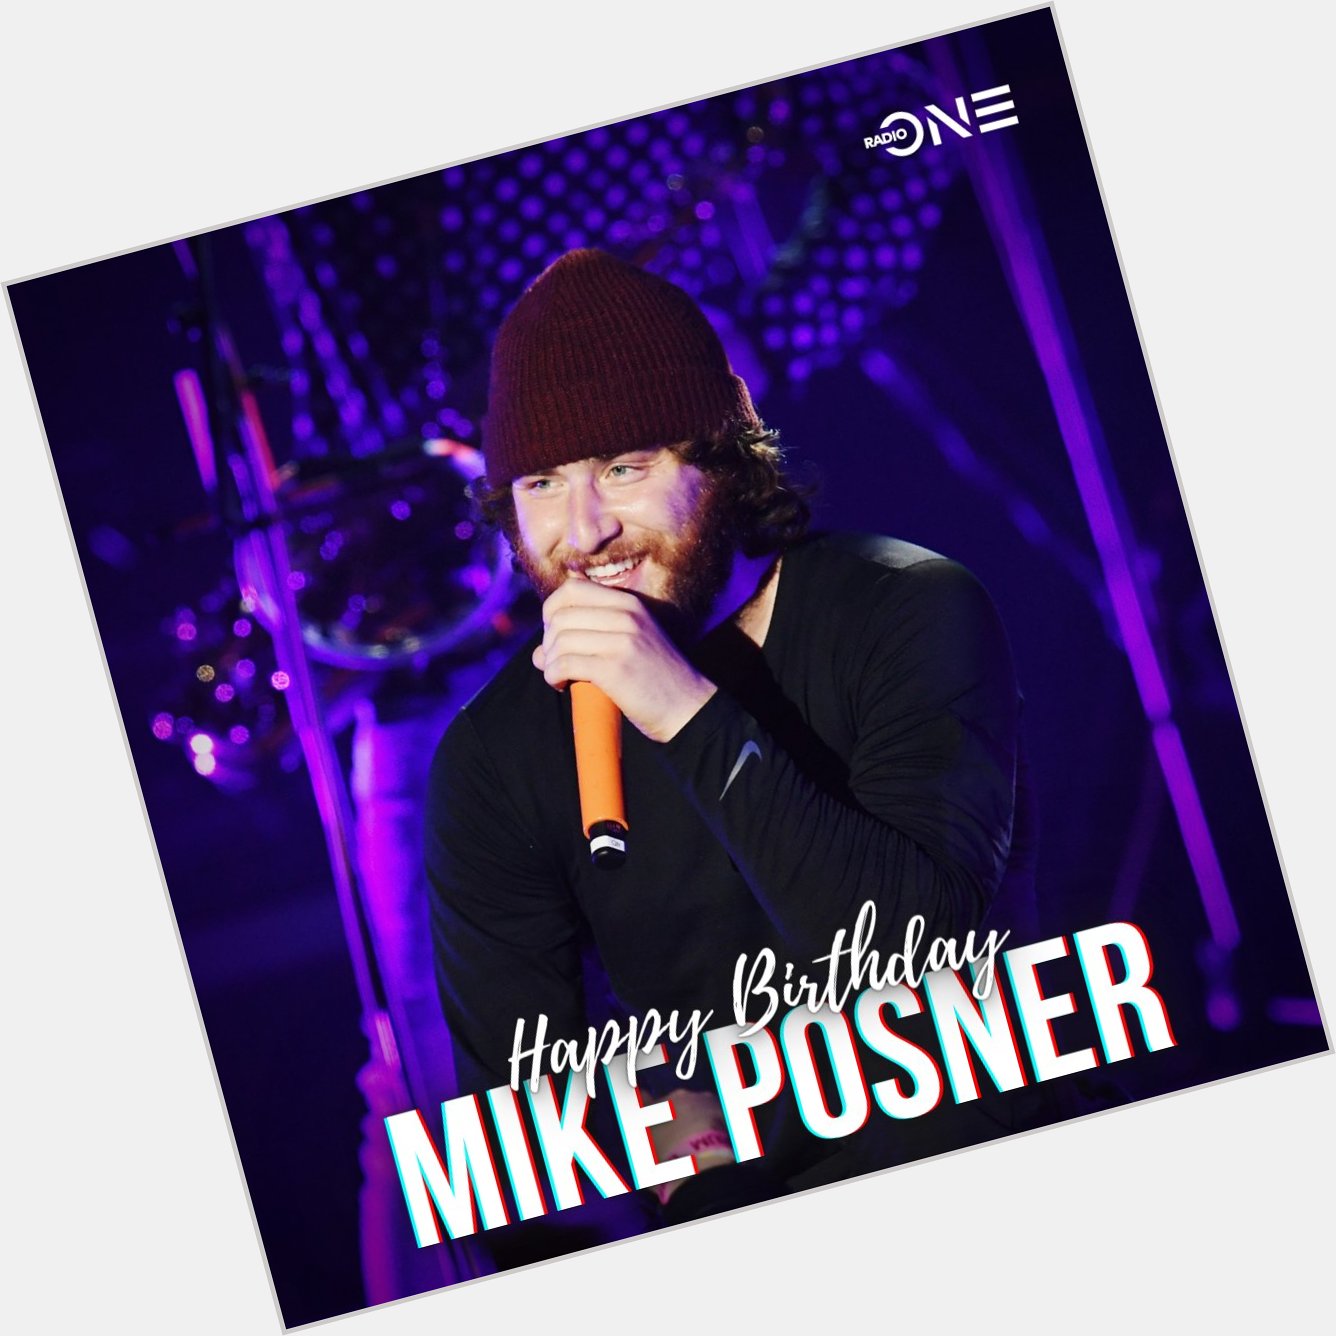 Wishing Mike Posner a happy 33rd birthday 